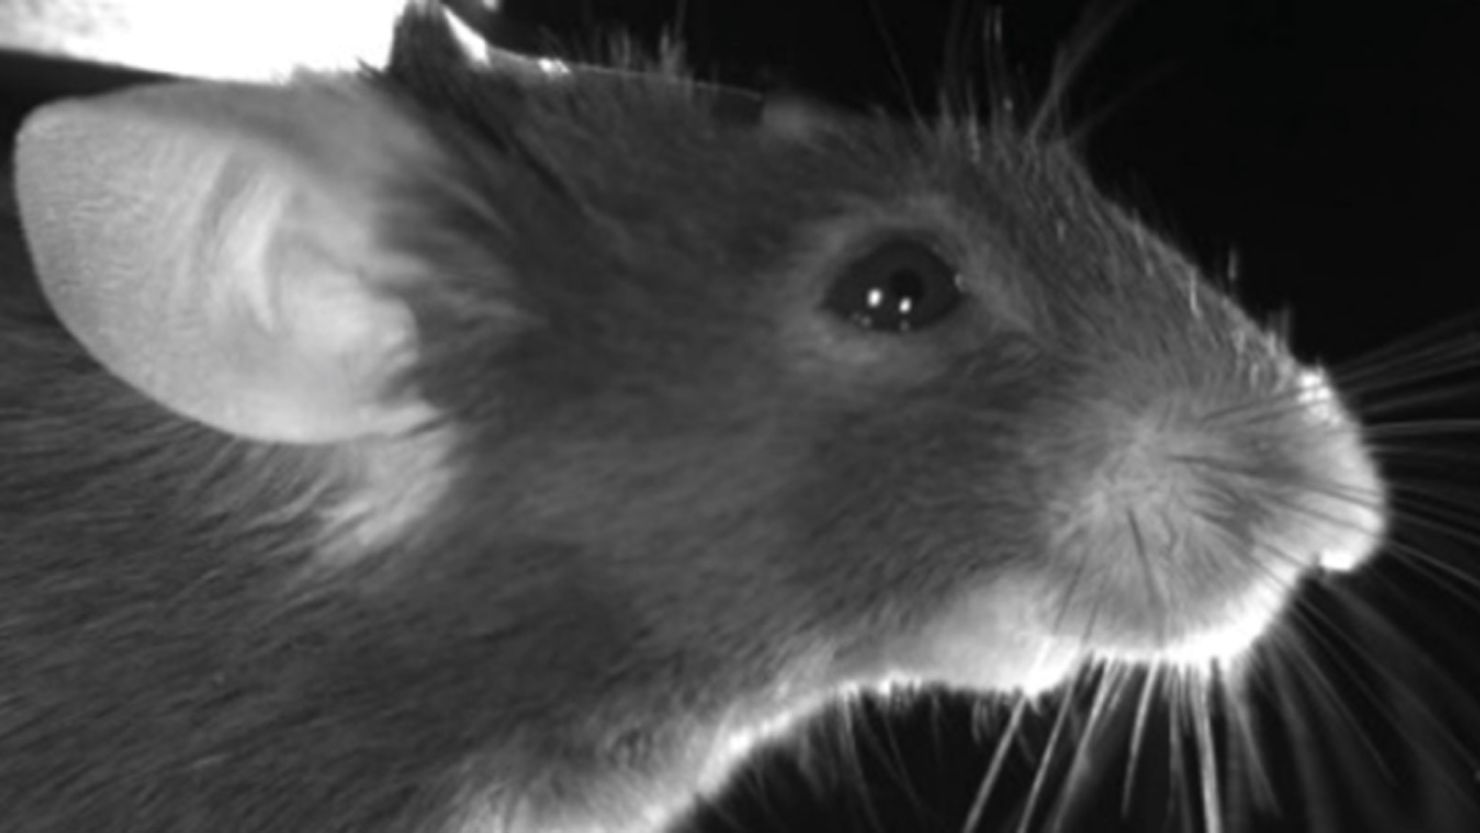 Eek! Mice make facial expressions based on their emotional state, new research published in Science shows. Reprinted with permission from N. Dolensek, N. Gogolla et al., Science Volume 367, 2020